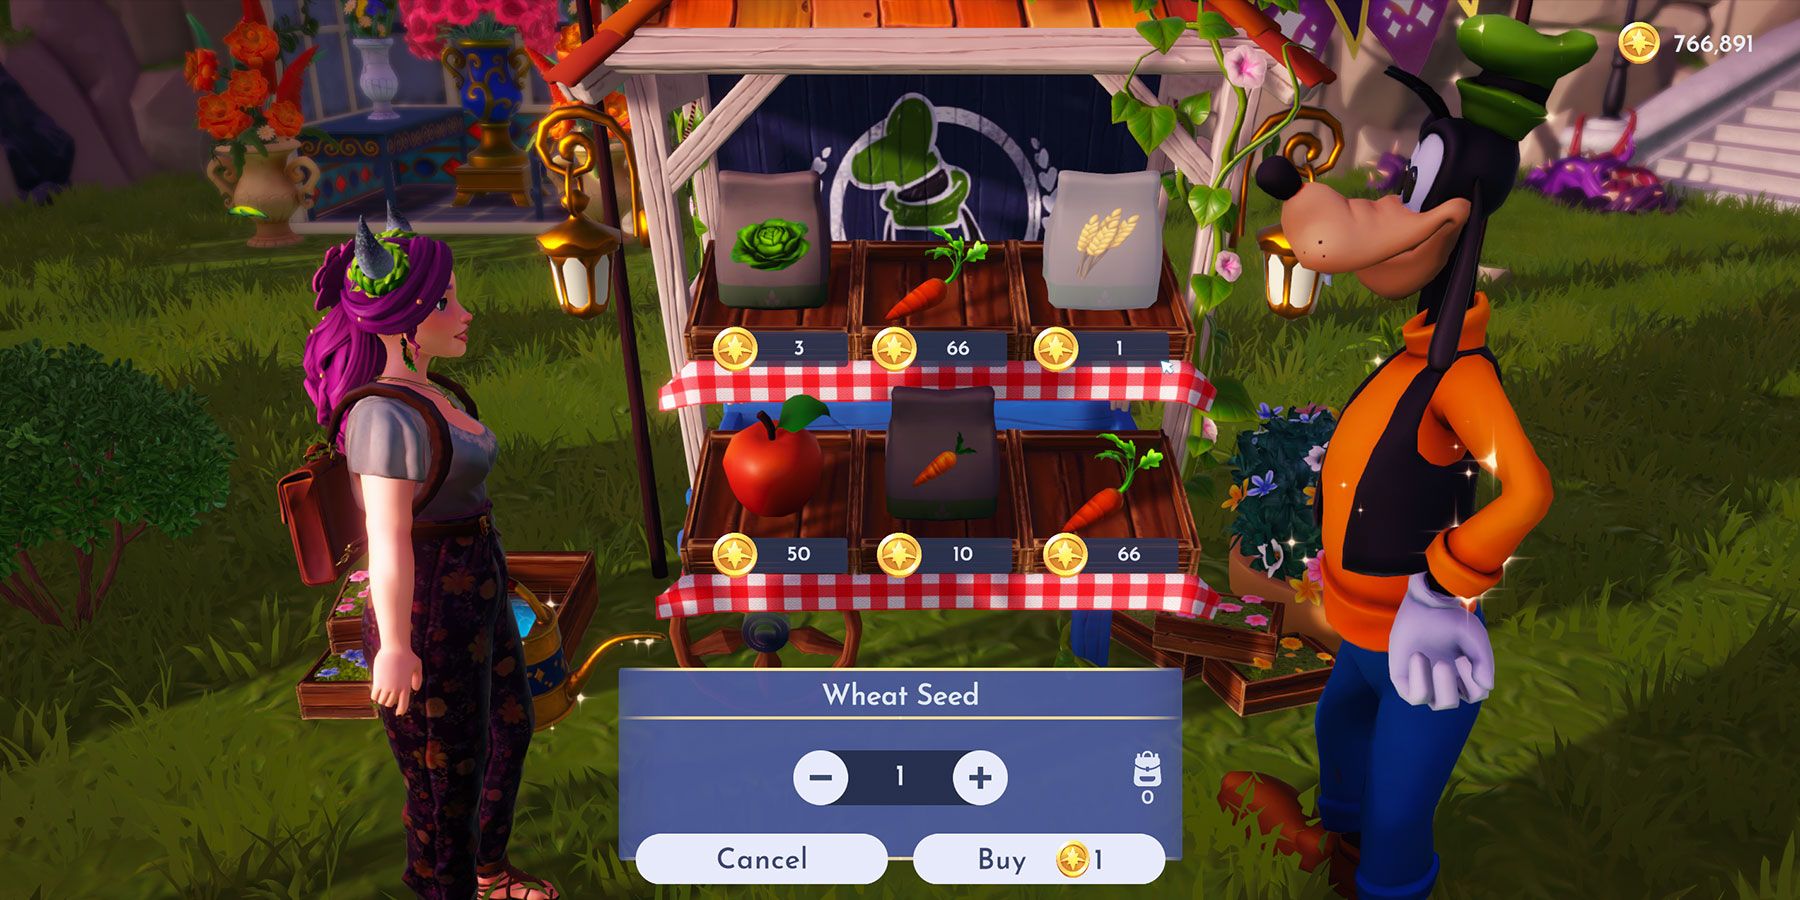 Purchase wheat seeds from Goofy's stand in Disney's Dreamlight Valley.